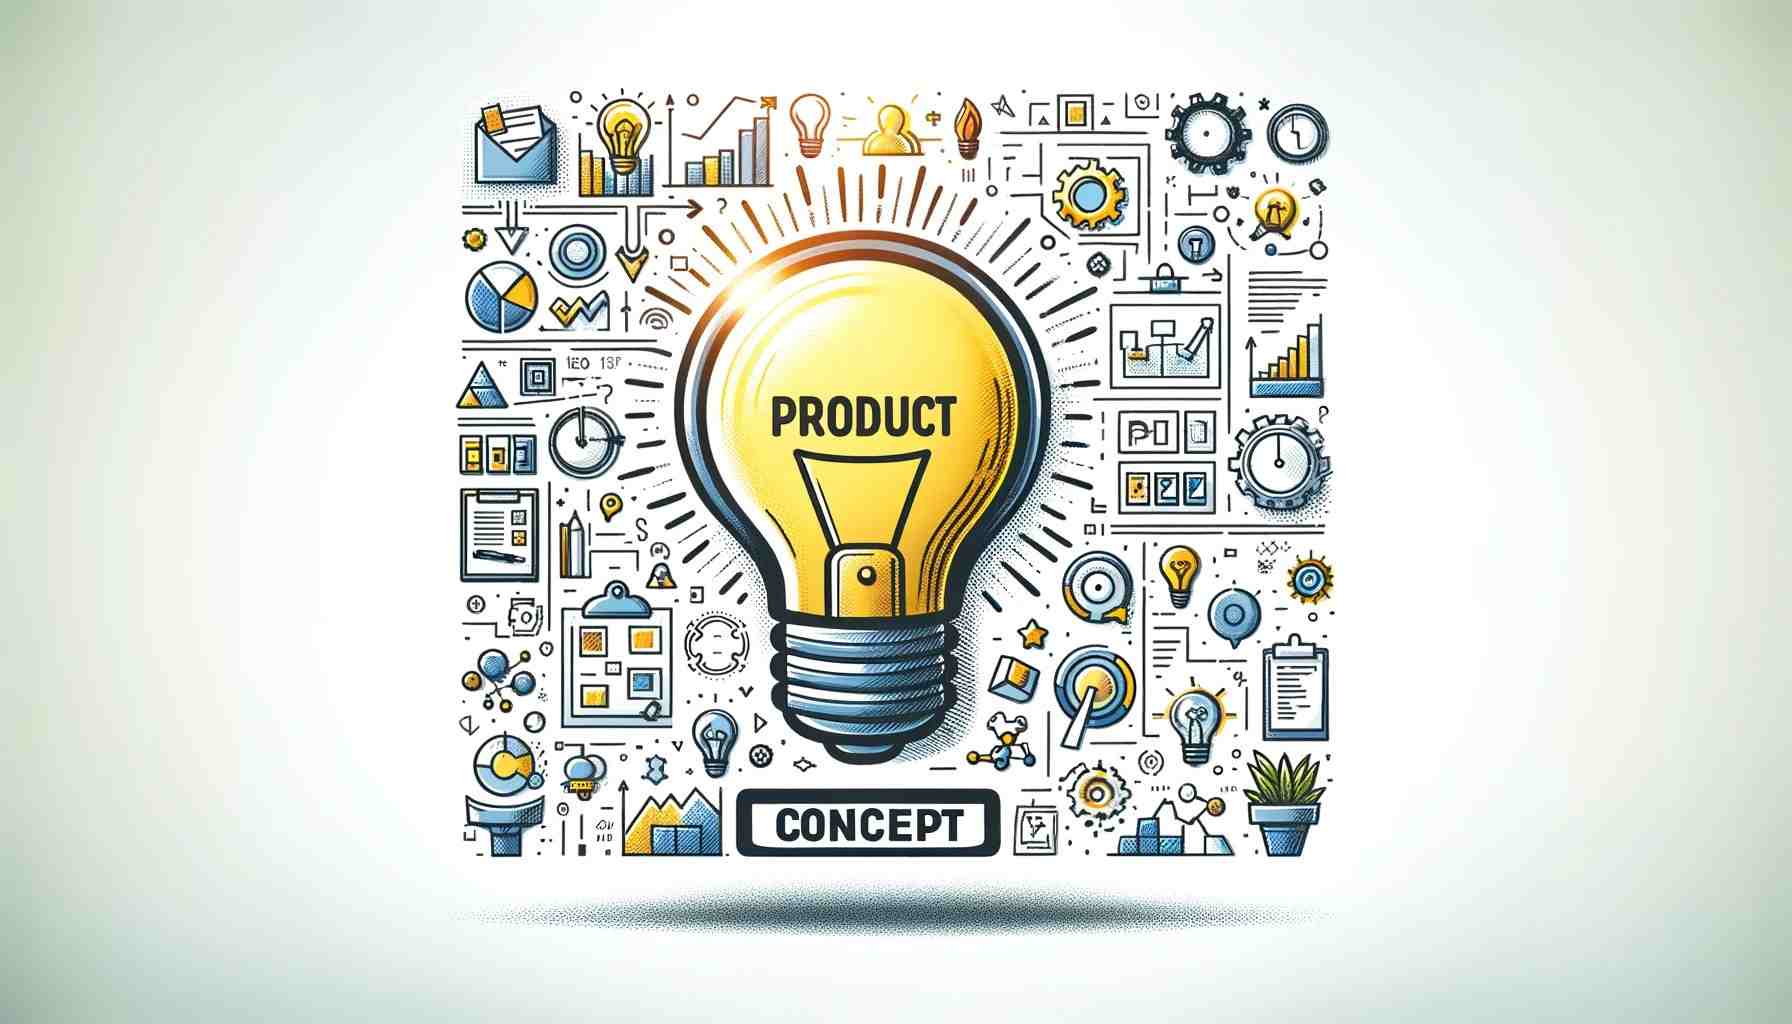 Defining a Product Concept